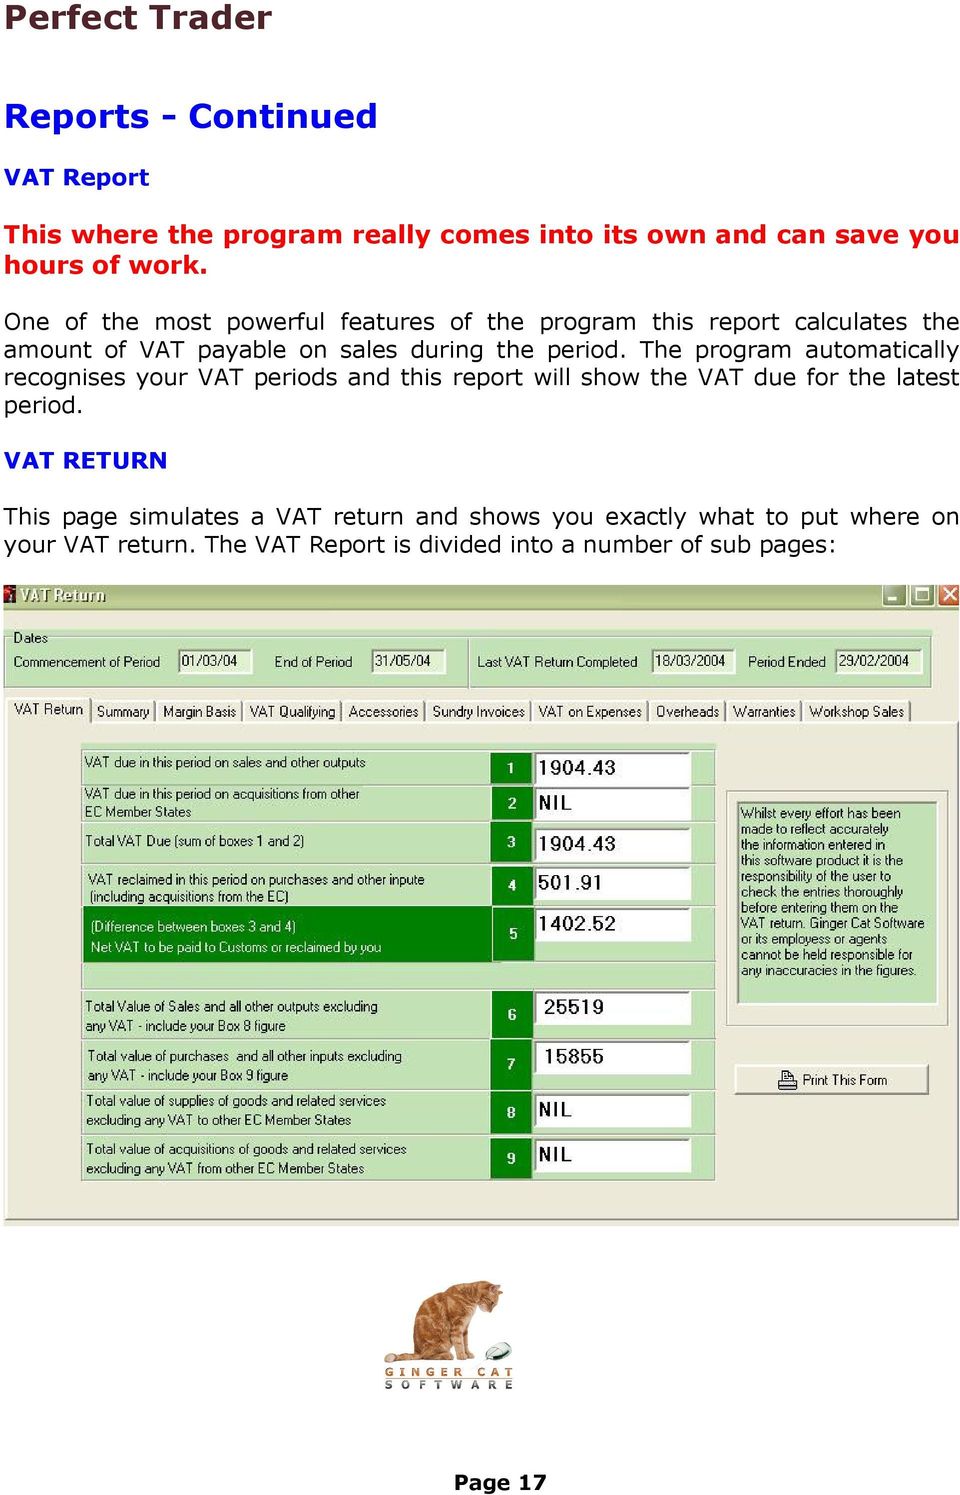 The program automatically recognises your VAT periods and this report will show the VAT due for the latest period.